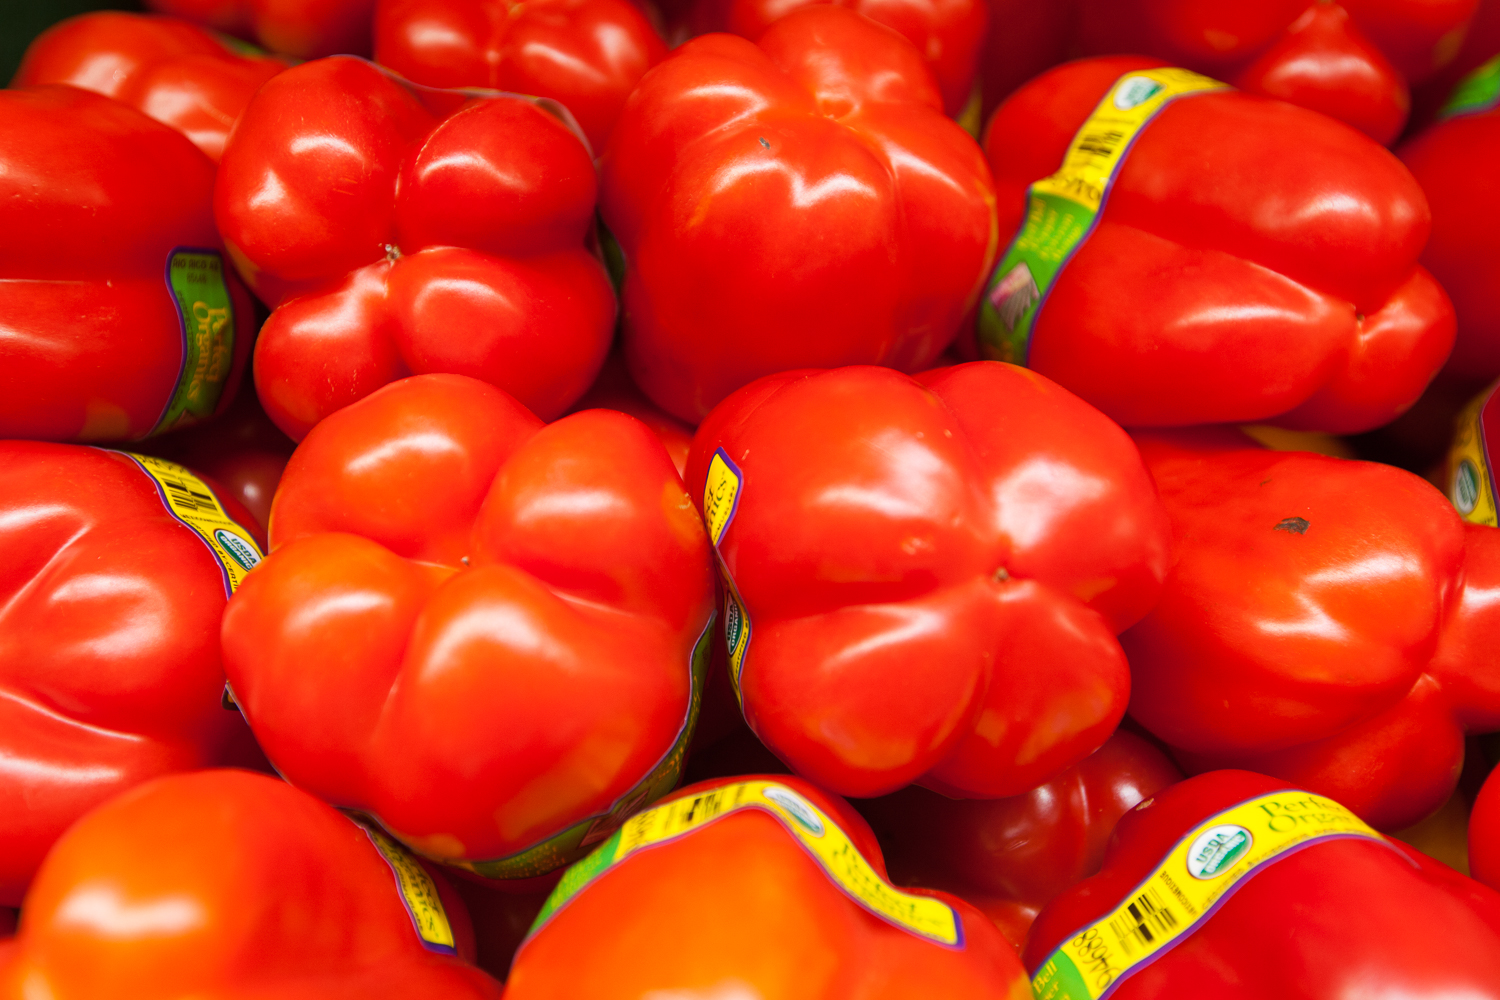 red-bell-peppers-produce-department-mana-foods.jpg